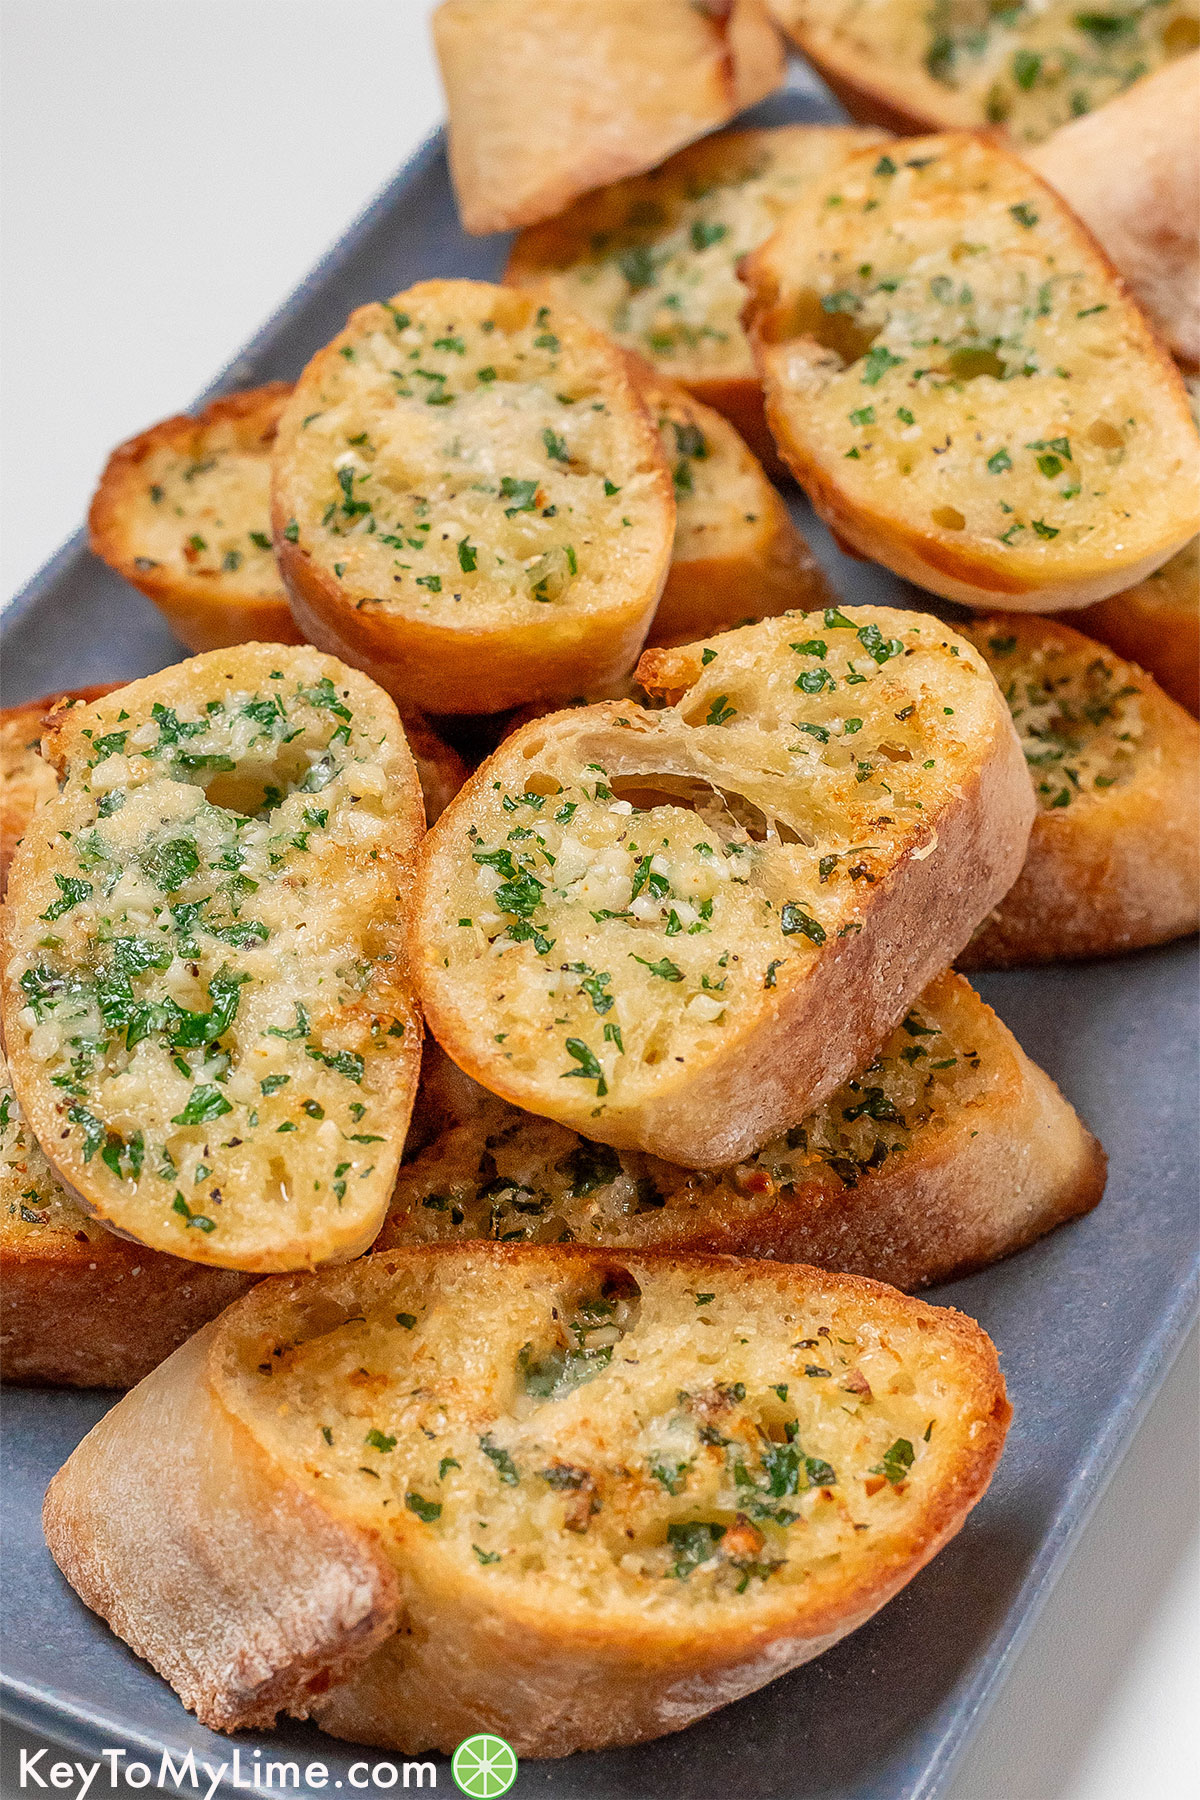 A side image of freshly cooked garlic bread spread on a platter with herbs and garlic throughout.